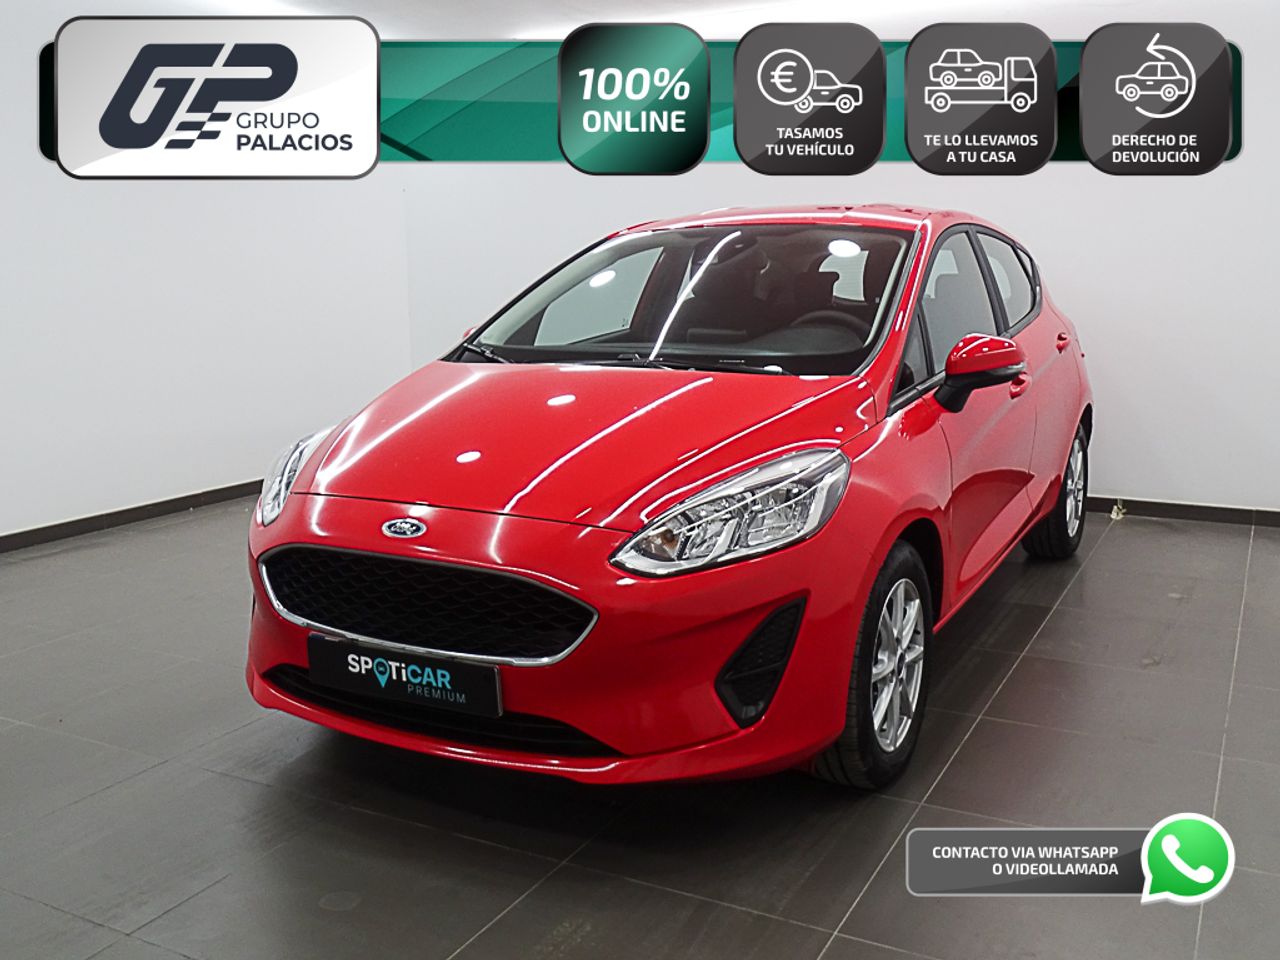 Ford Fiesta 1.1 IT-VCT 55kW (75CV) Limited Edit. 5p